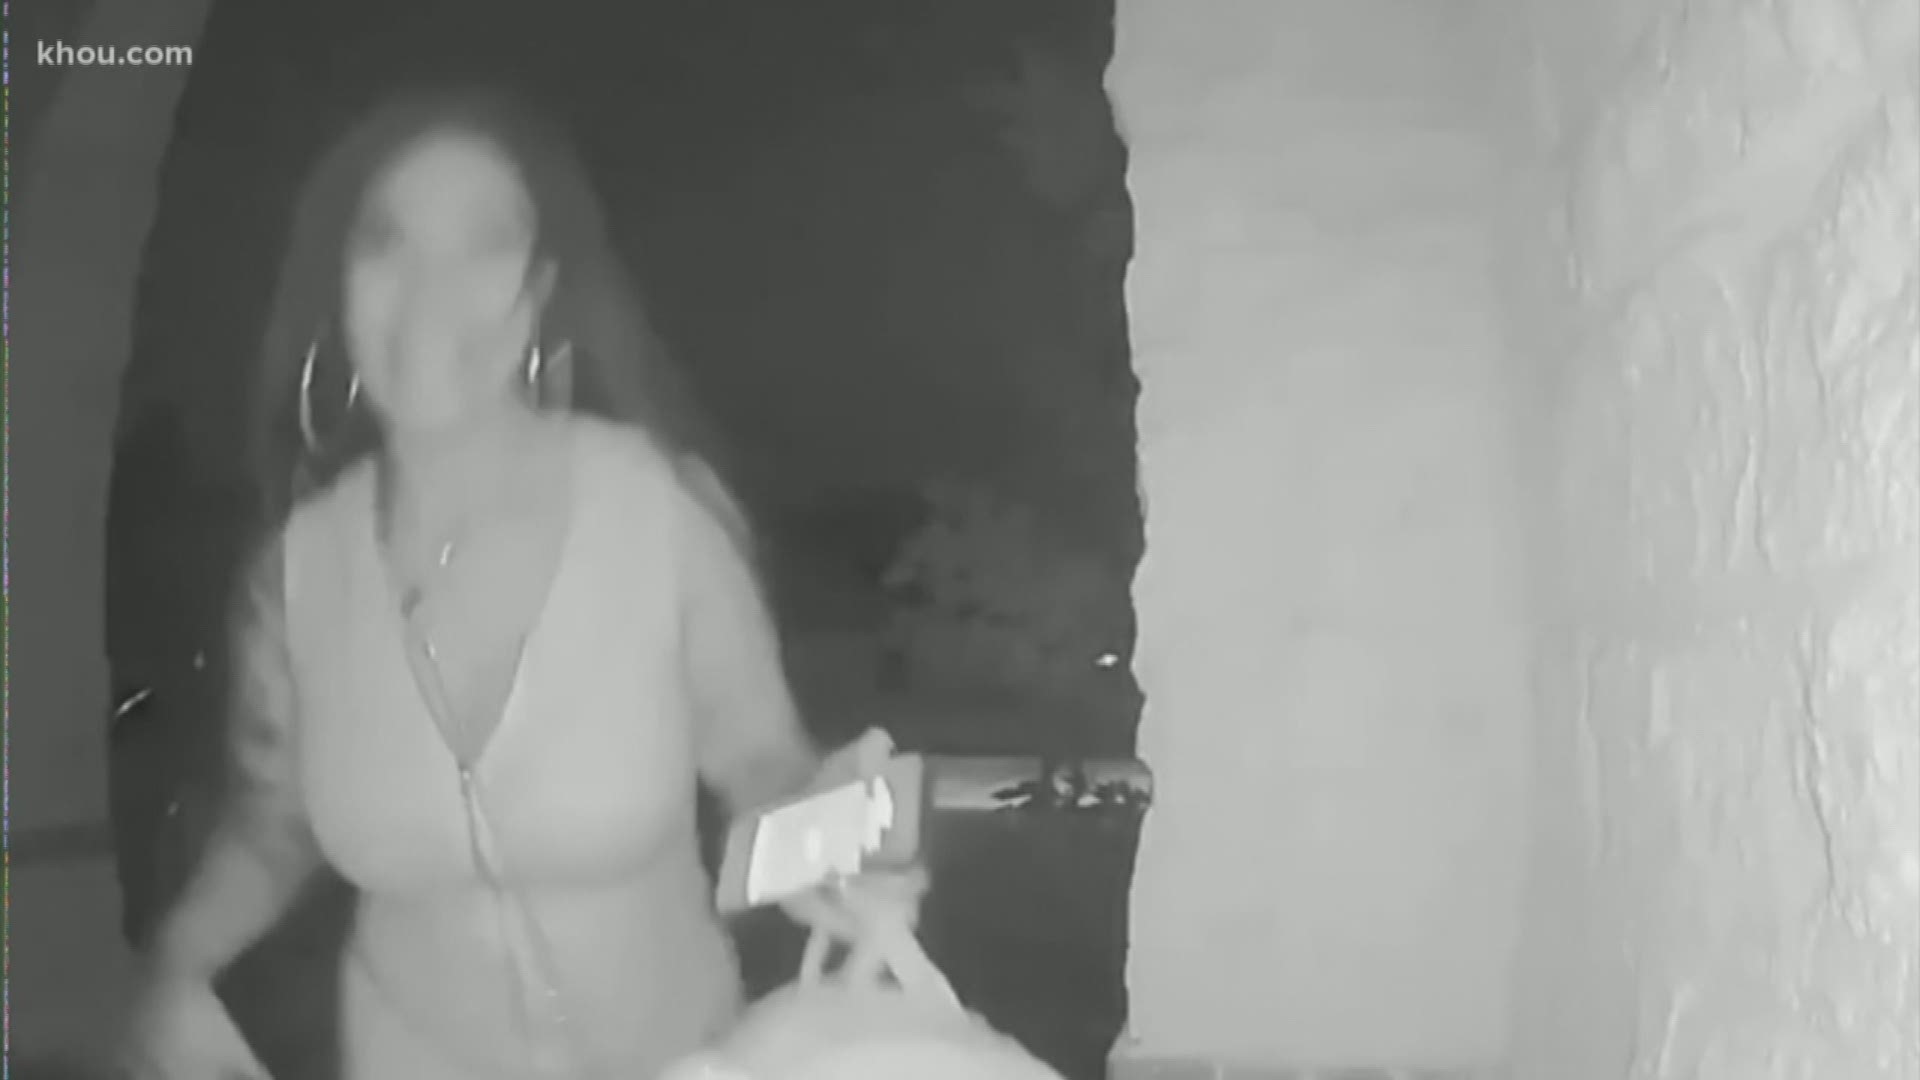 A woman captured on video leaving a toddler alone outside a stranger's home could face charges, according to the sheriff's office.